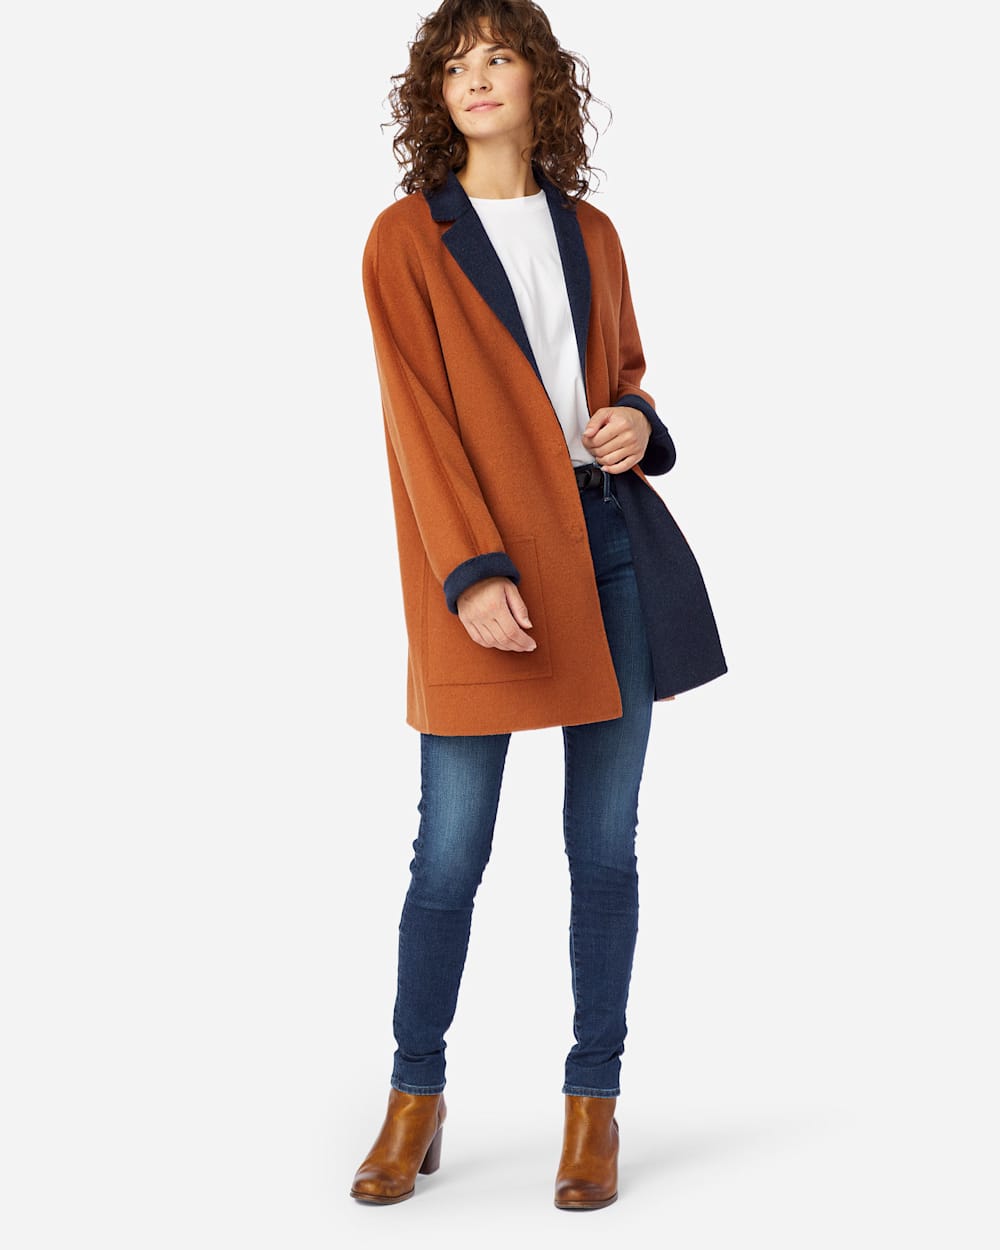 WOMEN'S DOUBLE FACE LONG JACKET IN GINGERBREAD/NAVY image number 1